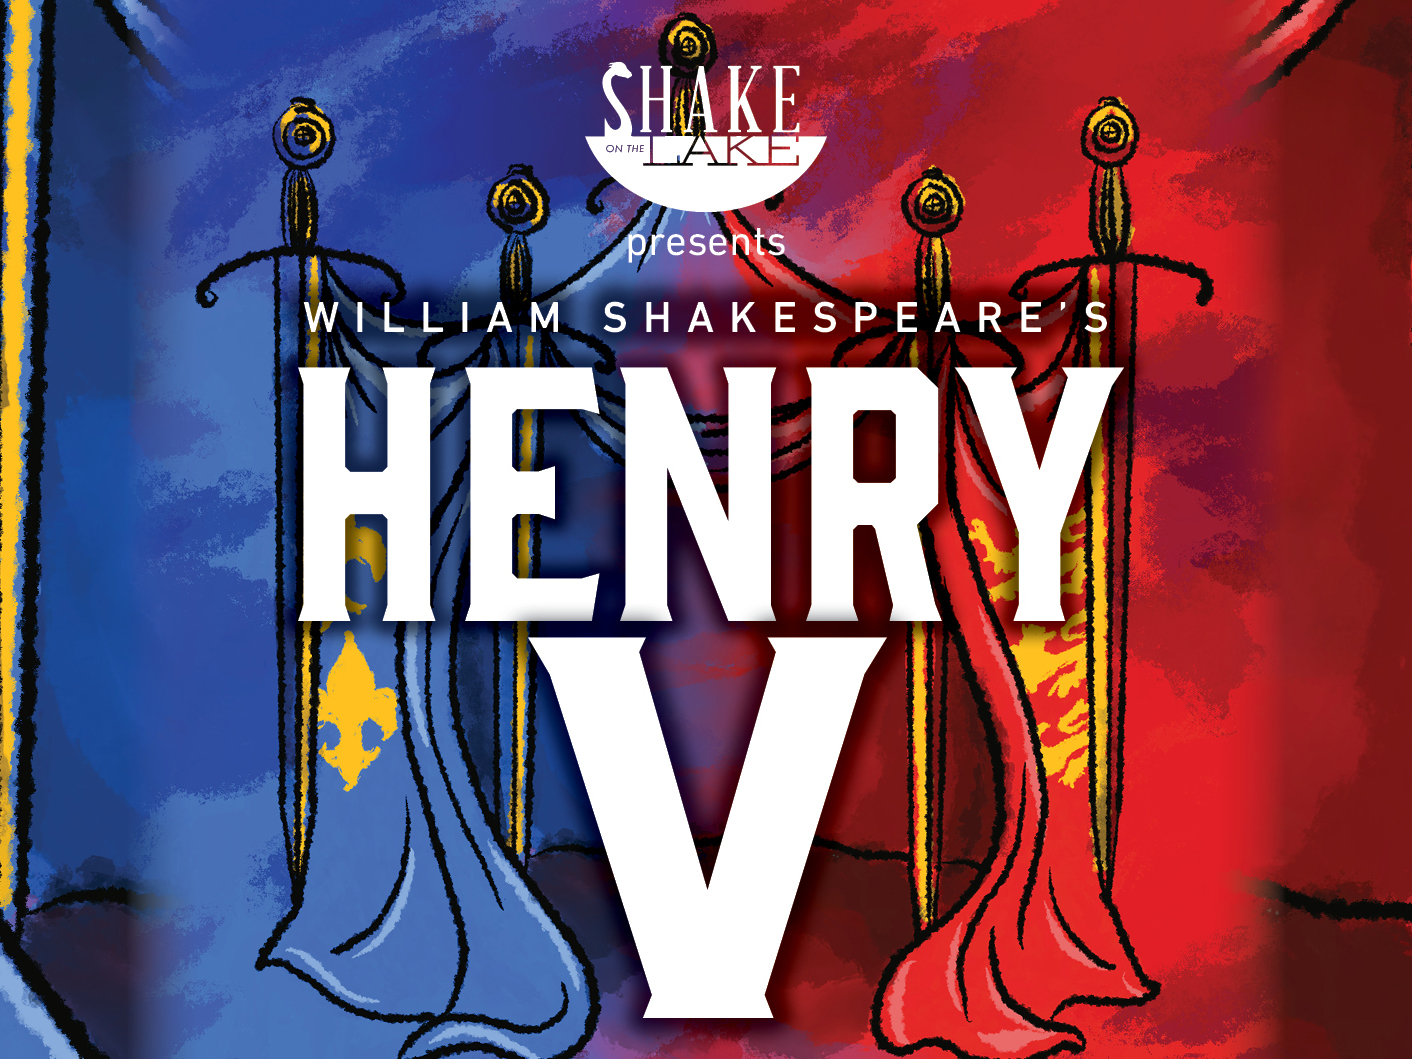 Photo of a graphic that reads Shake on the Lake presents William Shakespeare's Henry V on a blue and red background with golden sword illustrations.